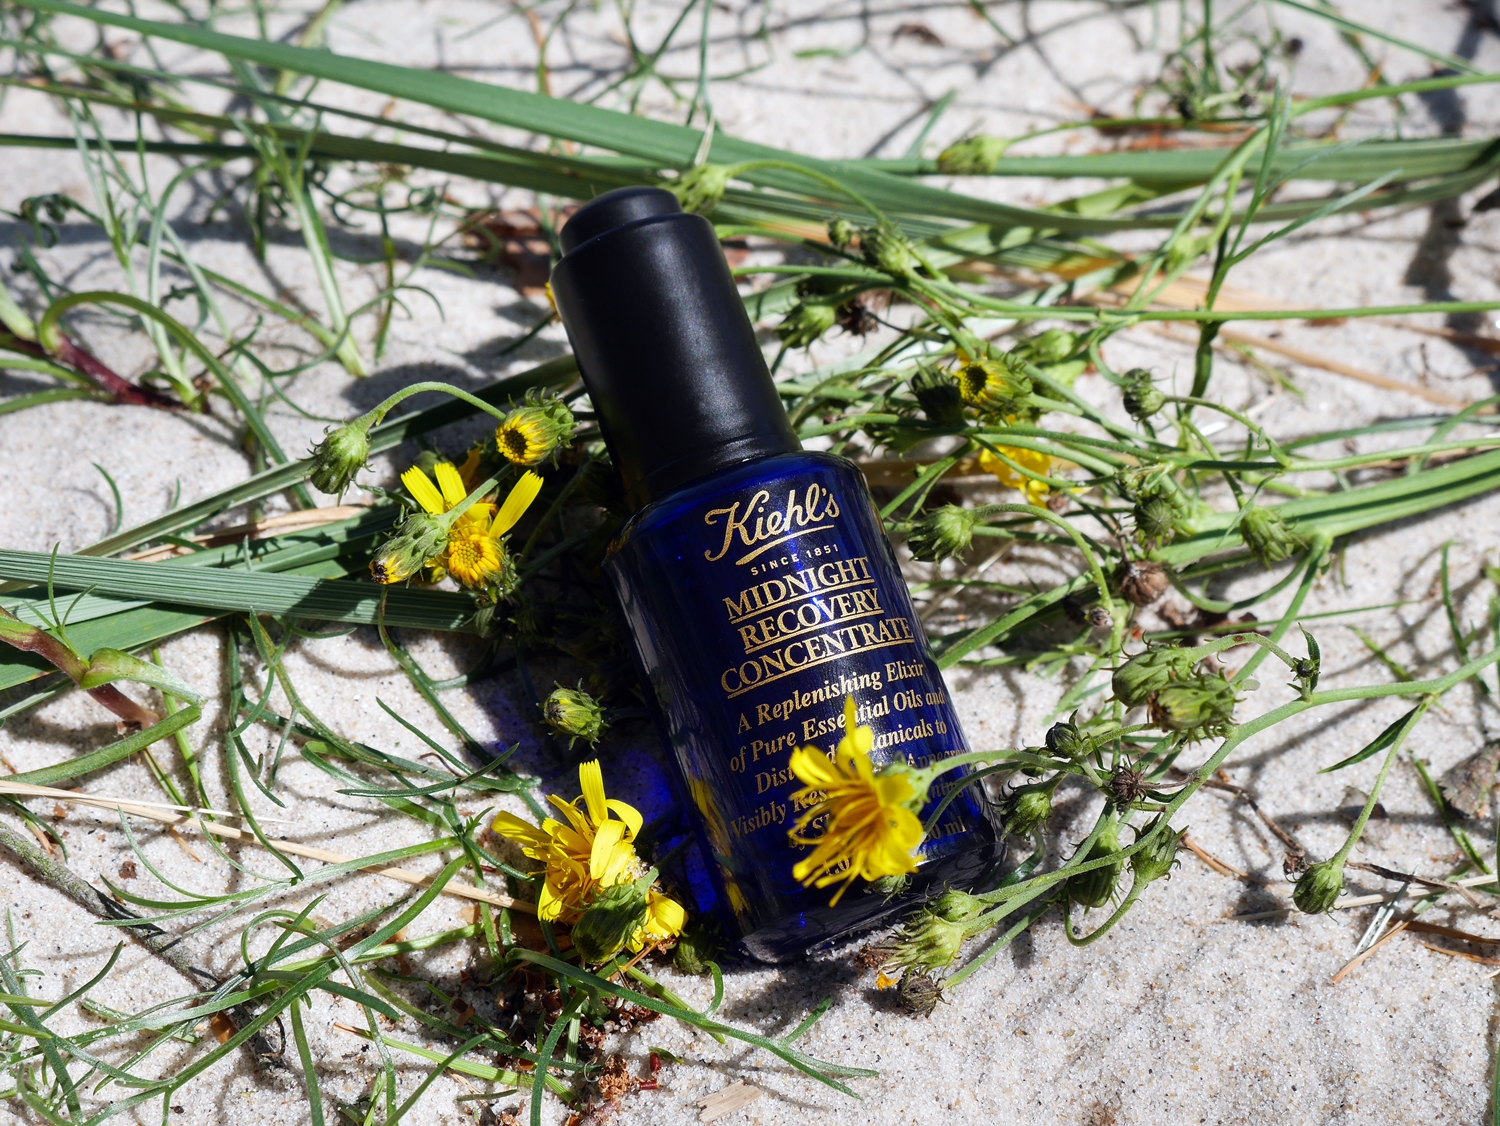 Kultowy kosmetyk | Kiehl’s Midnight Recovery Concentrate